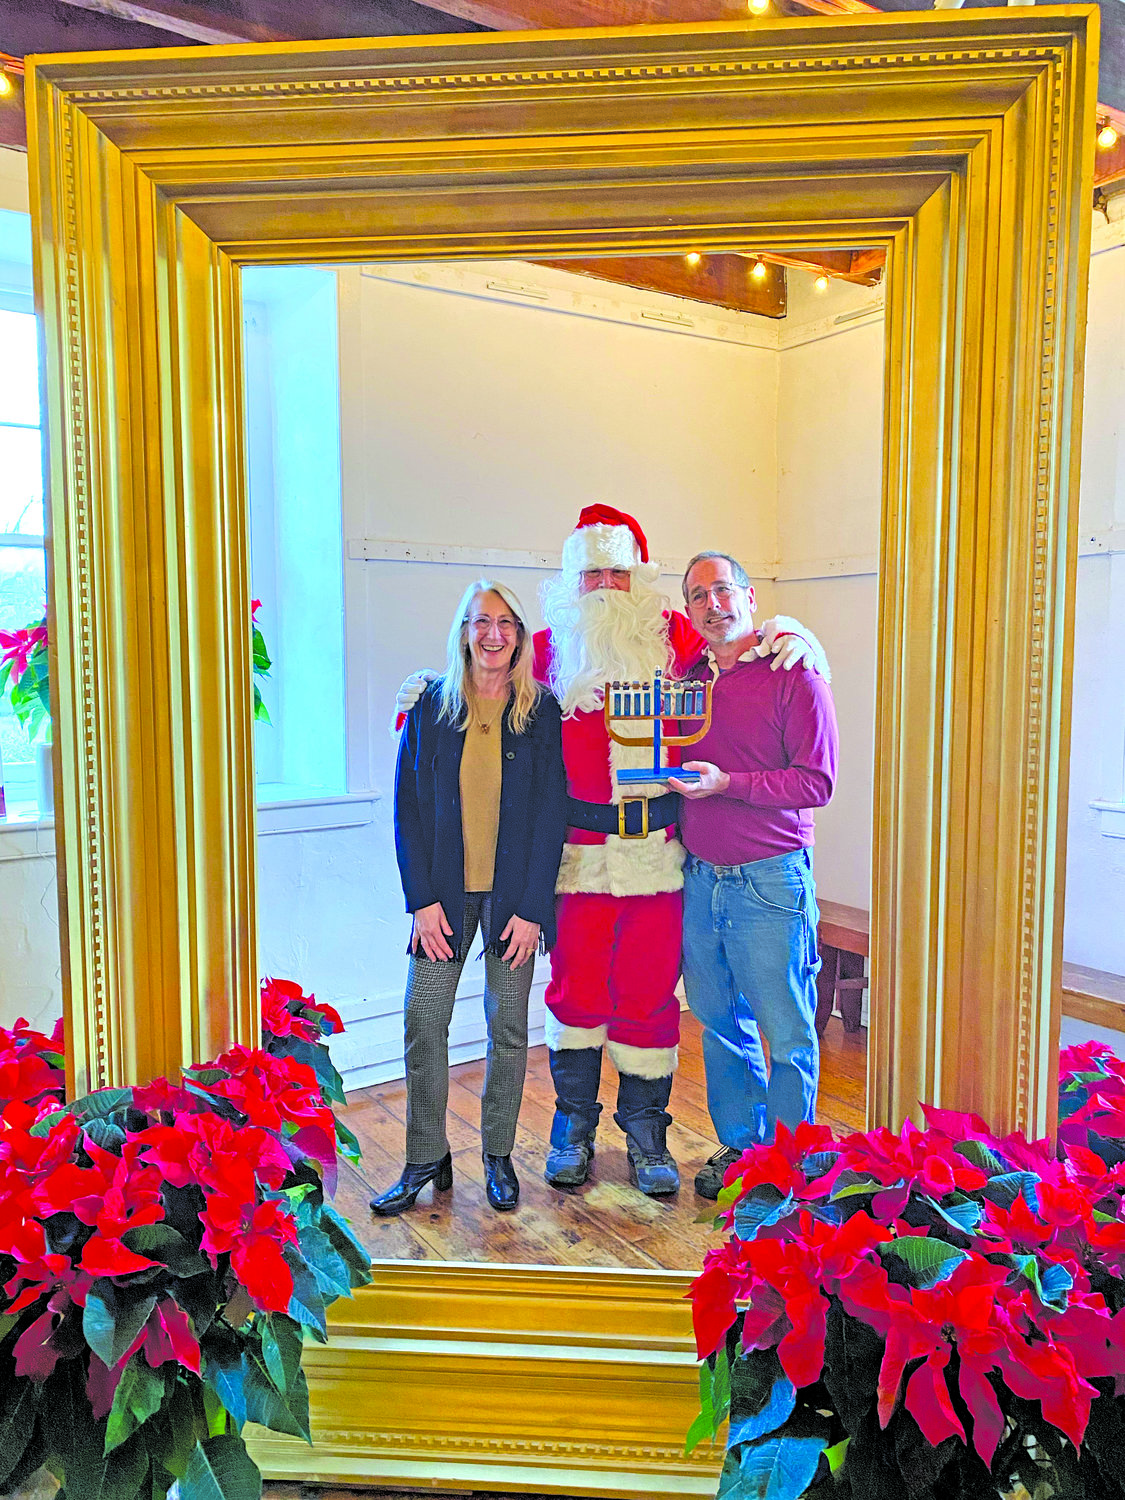 Andrea Mergentime, Rick McDaniel as Santa, and Andy Cleff, holding a menorah.